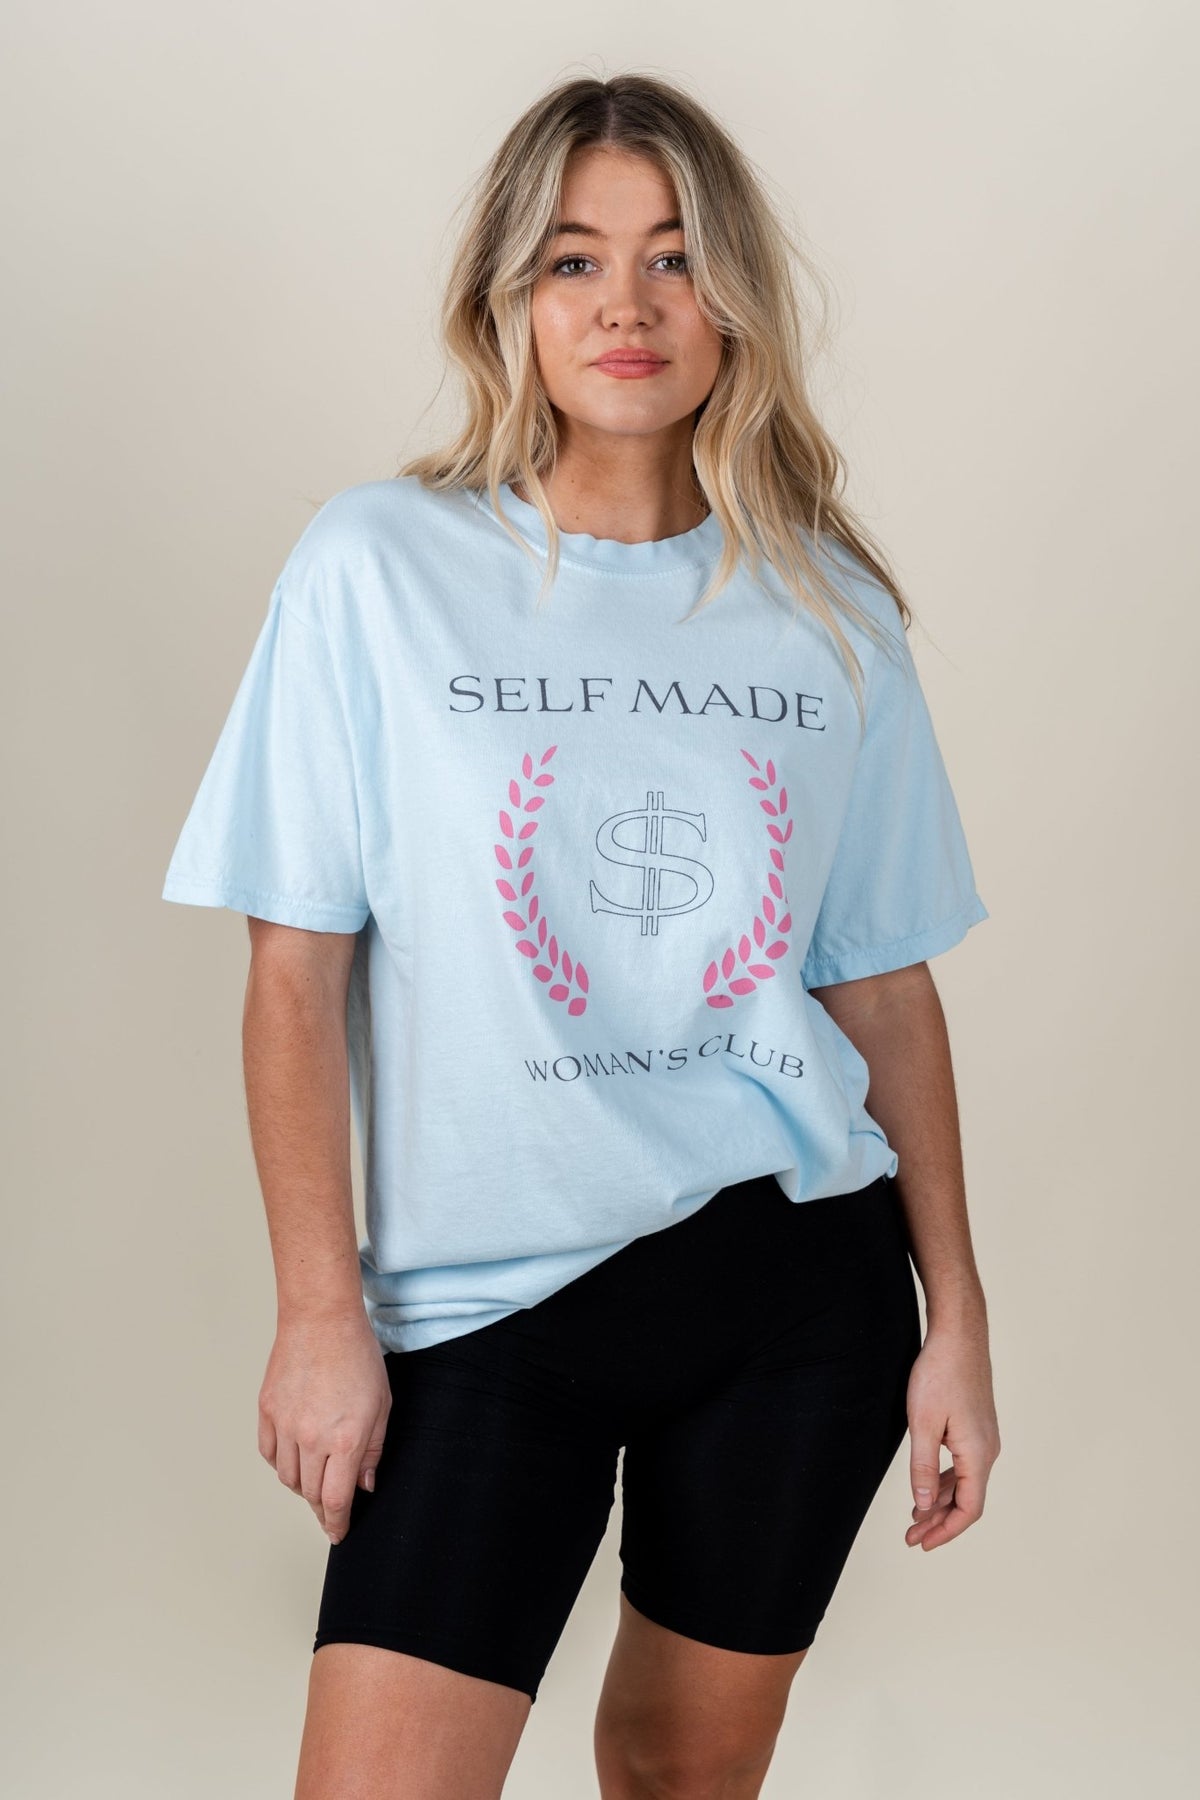 Self made woman's club t-shirt soothing blue - Cute T-shirt - Trendy Graphic T-Shirts at Lush Fashion Lounge Boutique in Oklahoma City